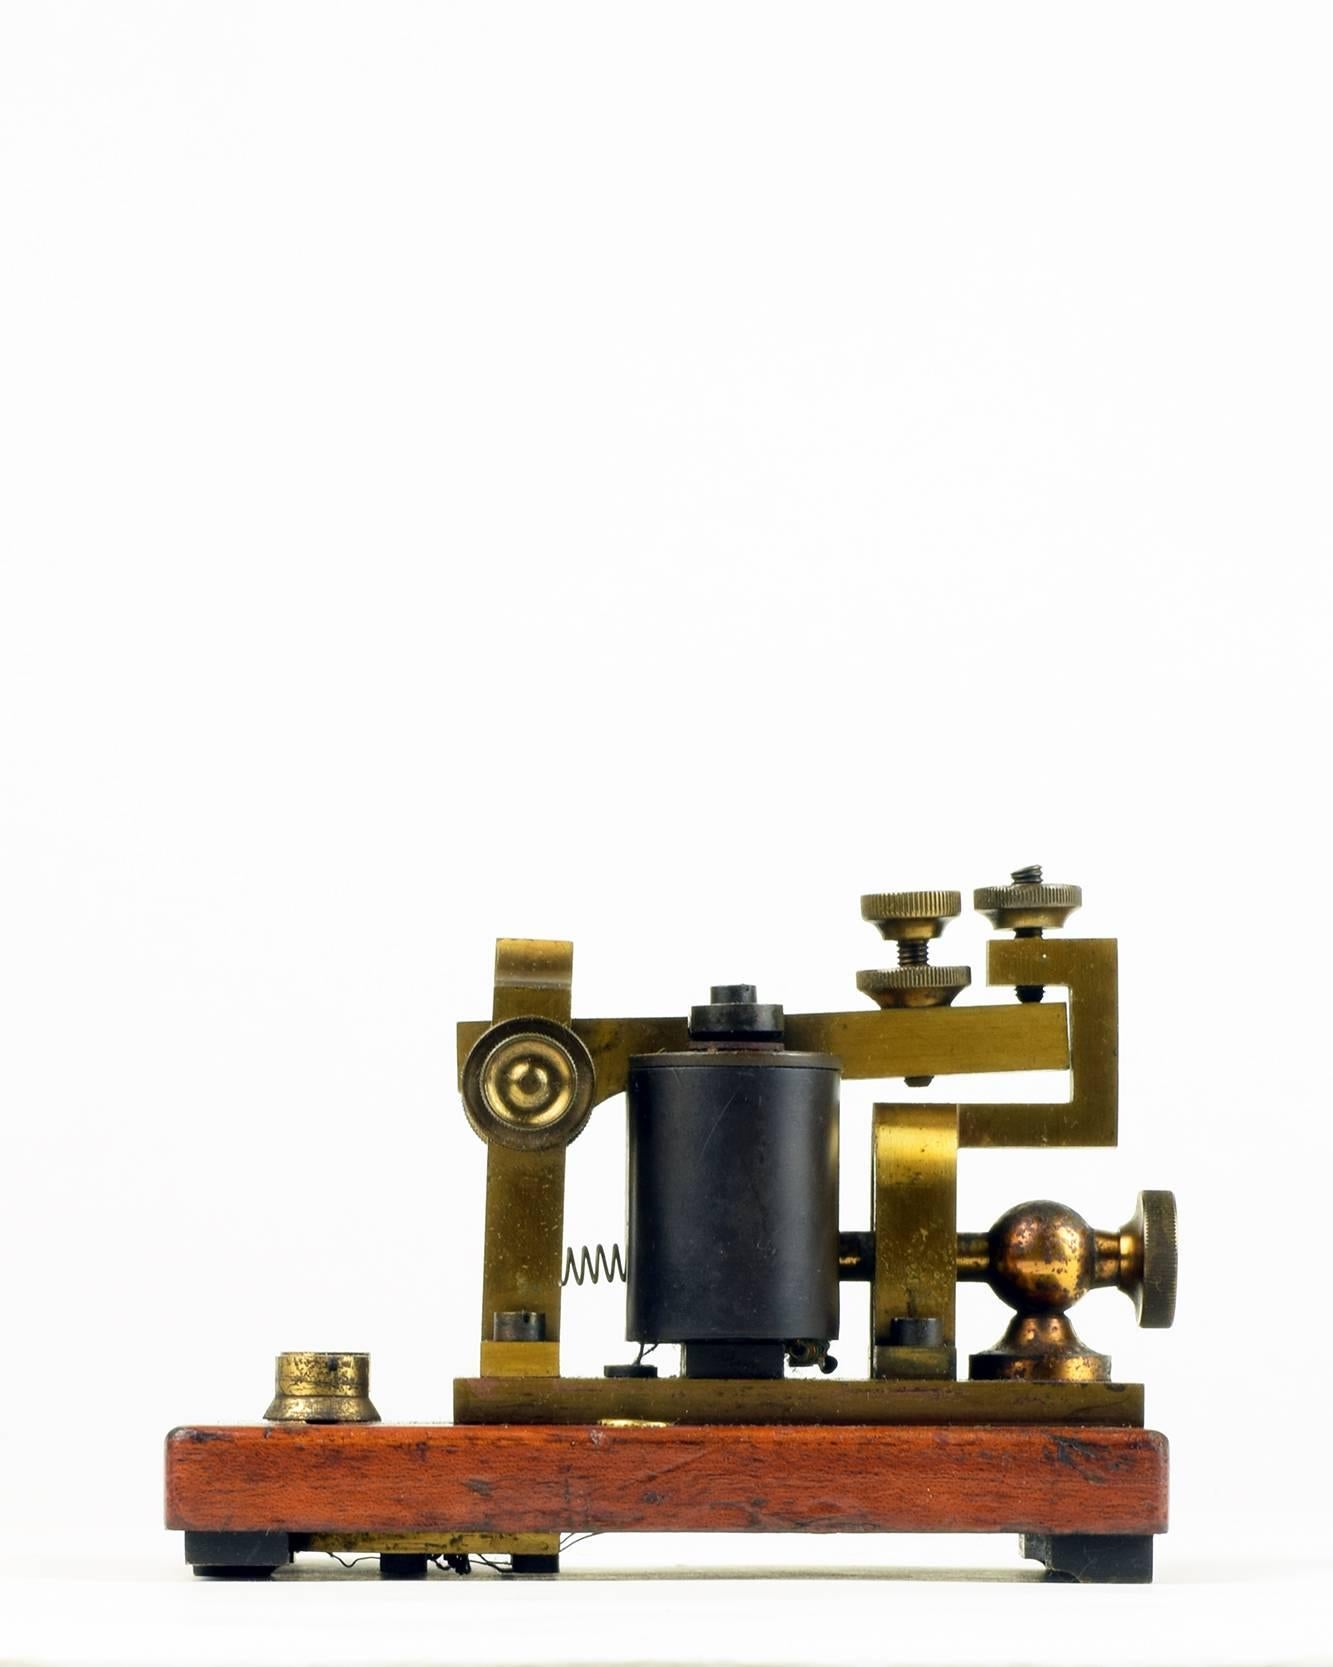 The British GPO (General Post Office) Morse Code (Telegraph) sounder.
Produced in Silvertown (E. London), pre 1880.
Brass and mahogany.

This early Morse Code sounder is considered to be 'the grandest sounder of all' and is much sought after by